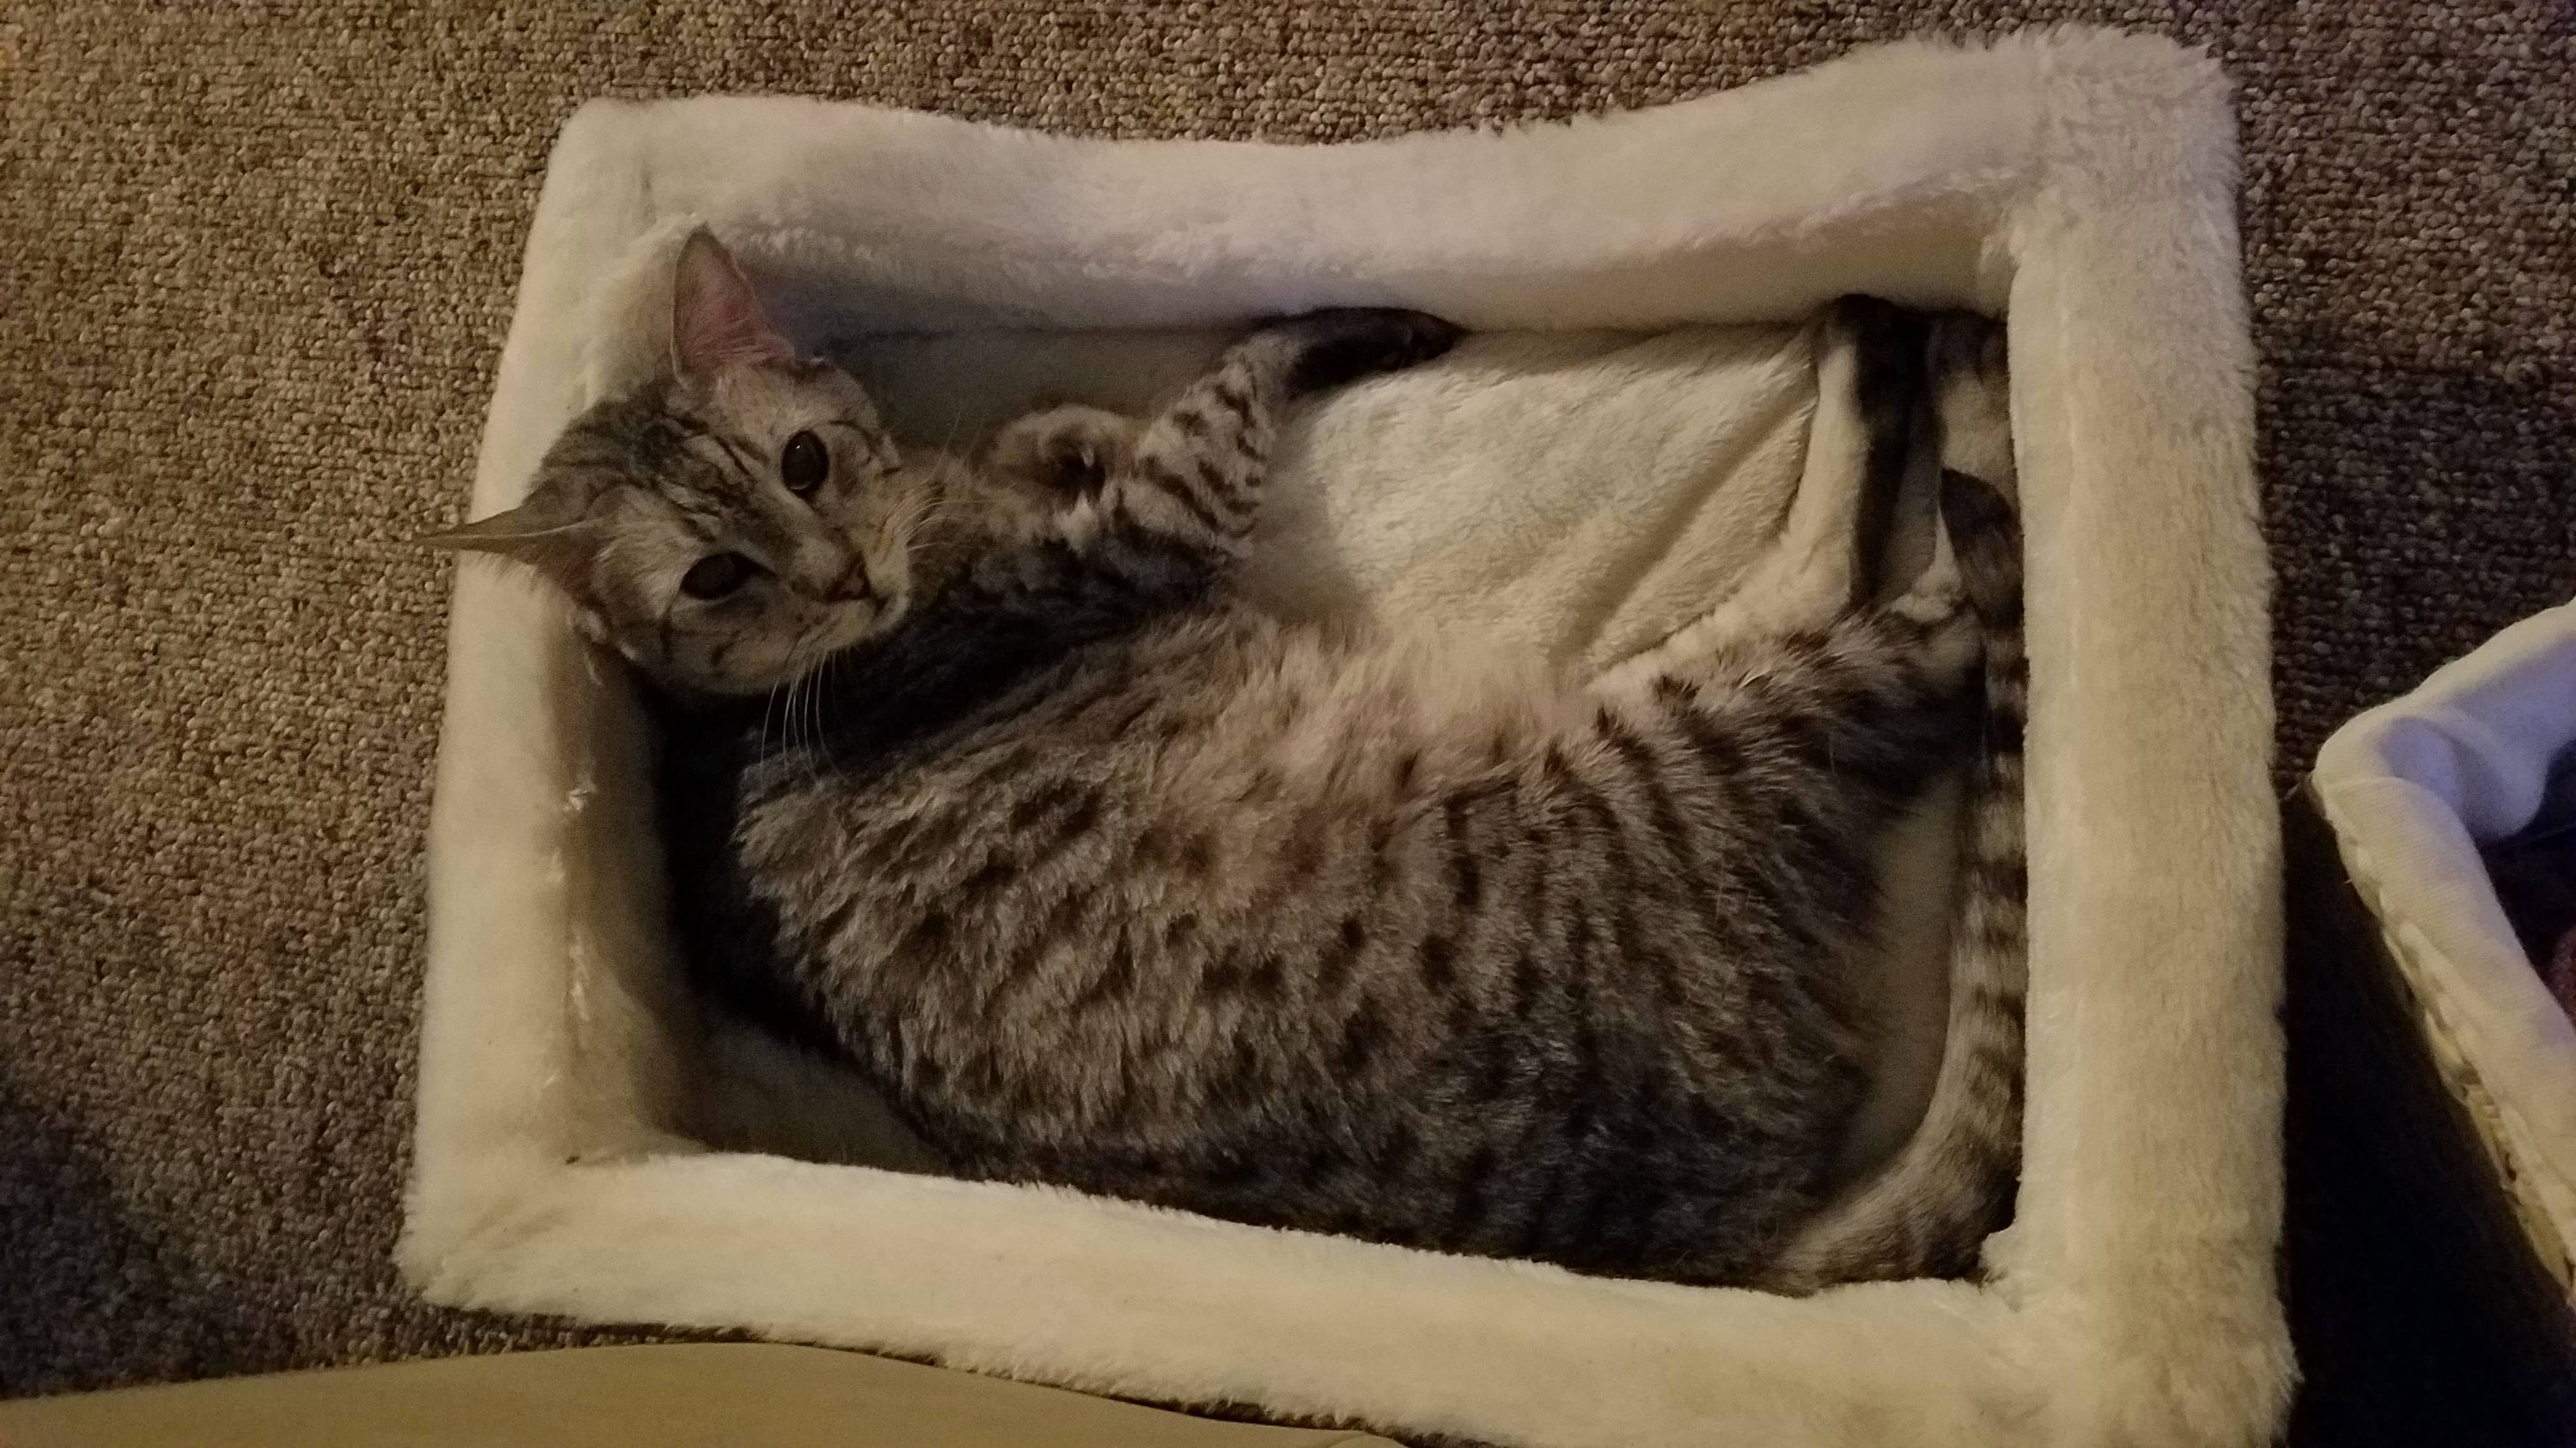 When your cat finally sits in the bed you bought him after 6 months of ignoring it.